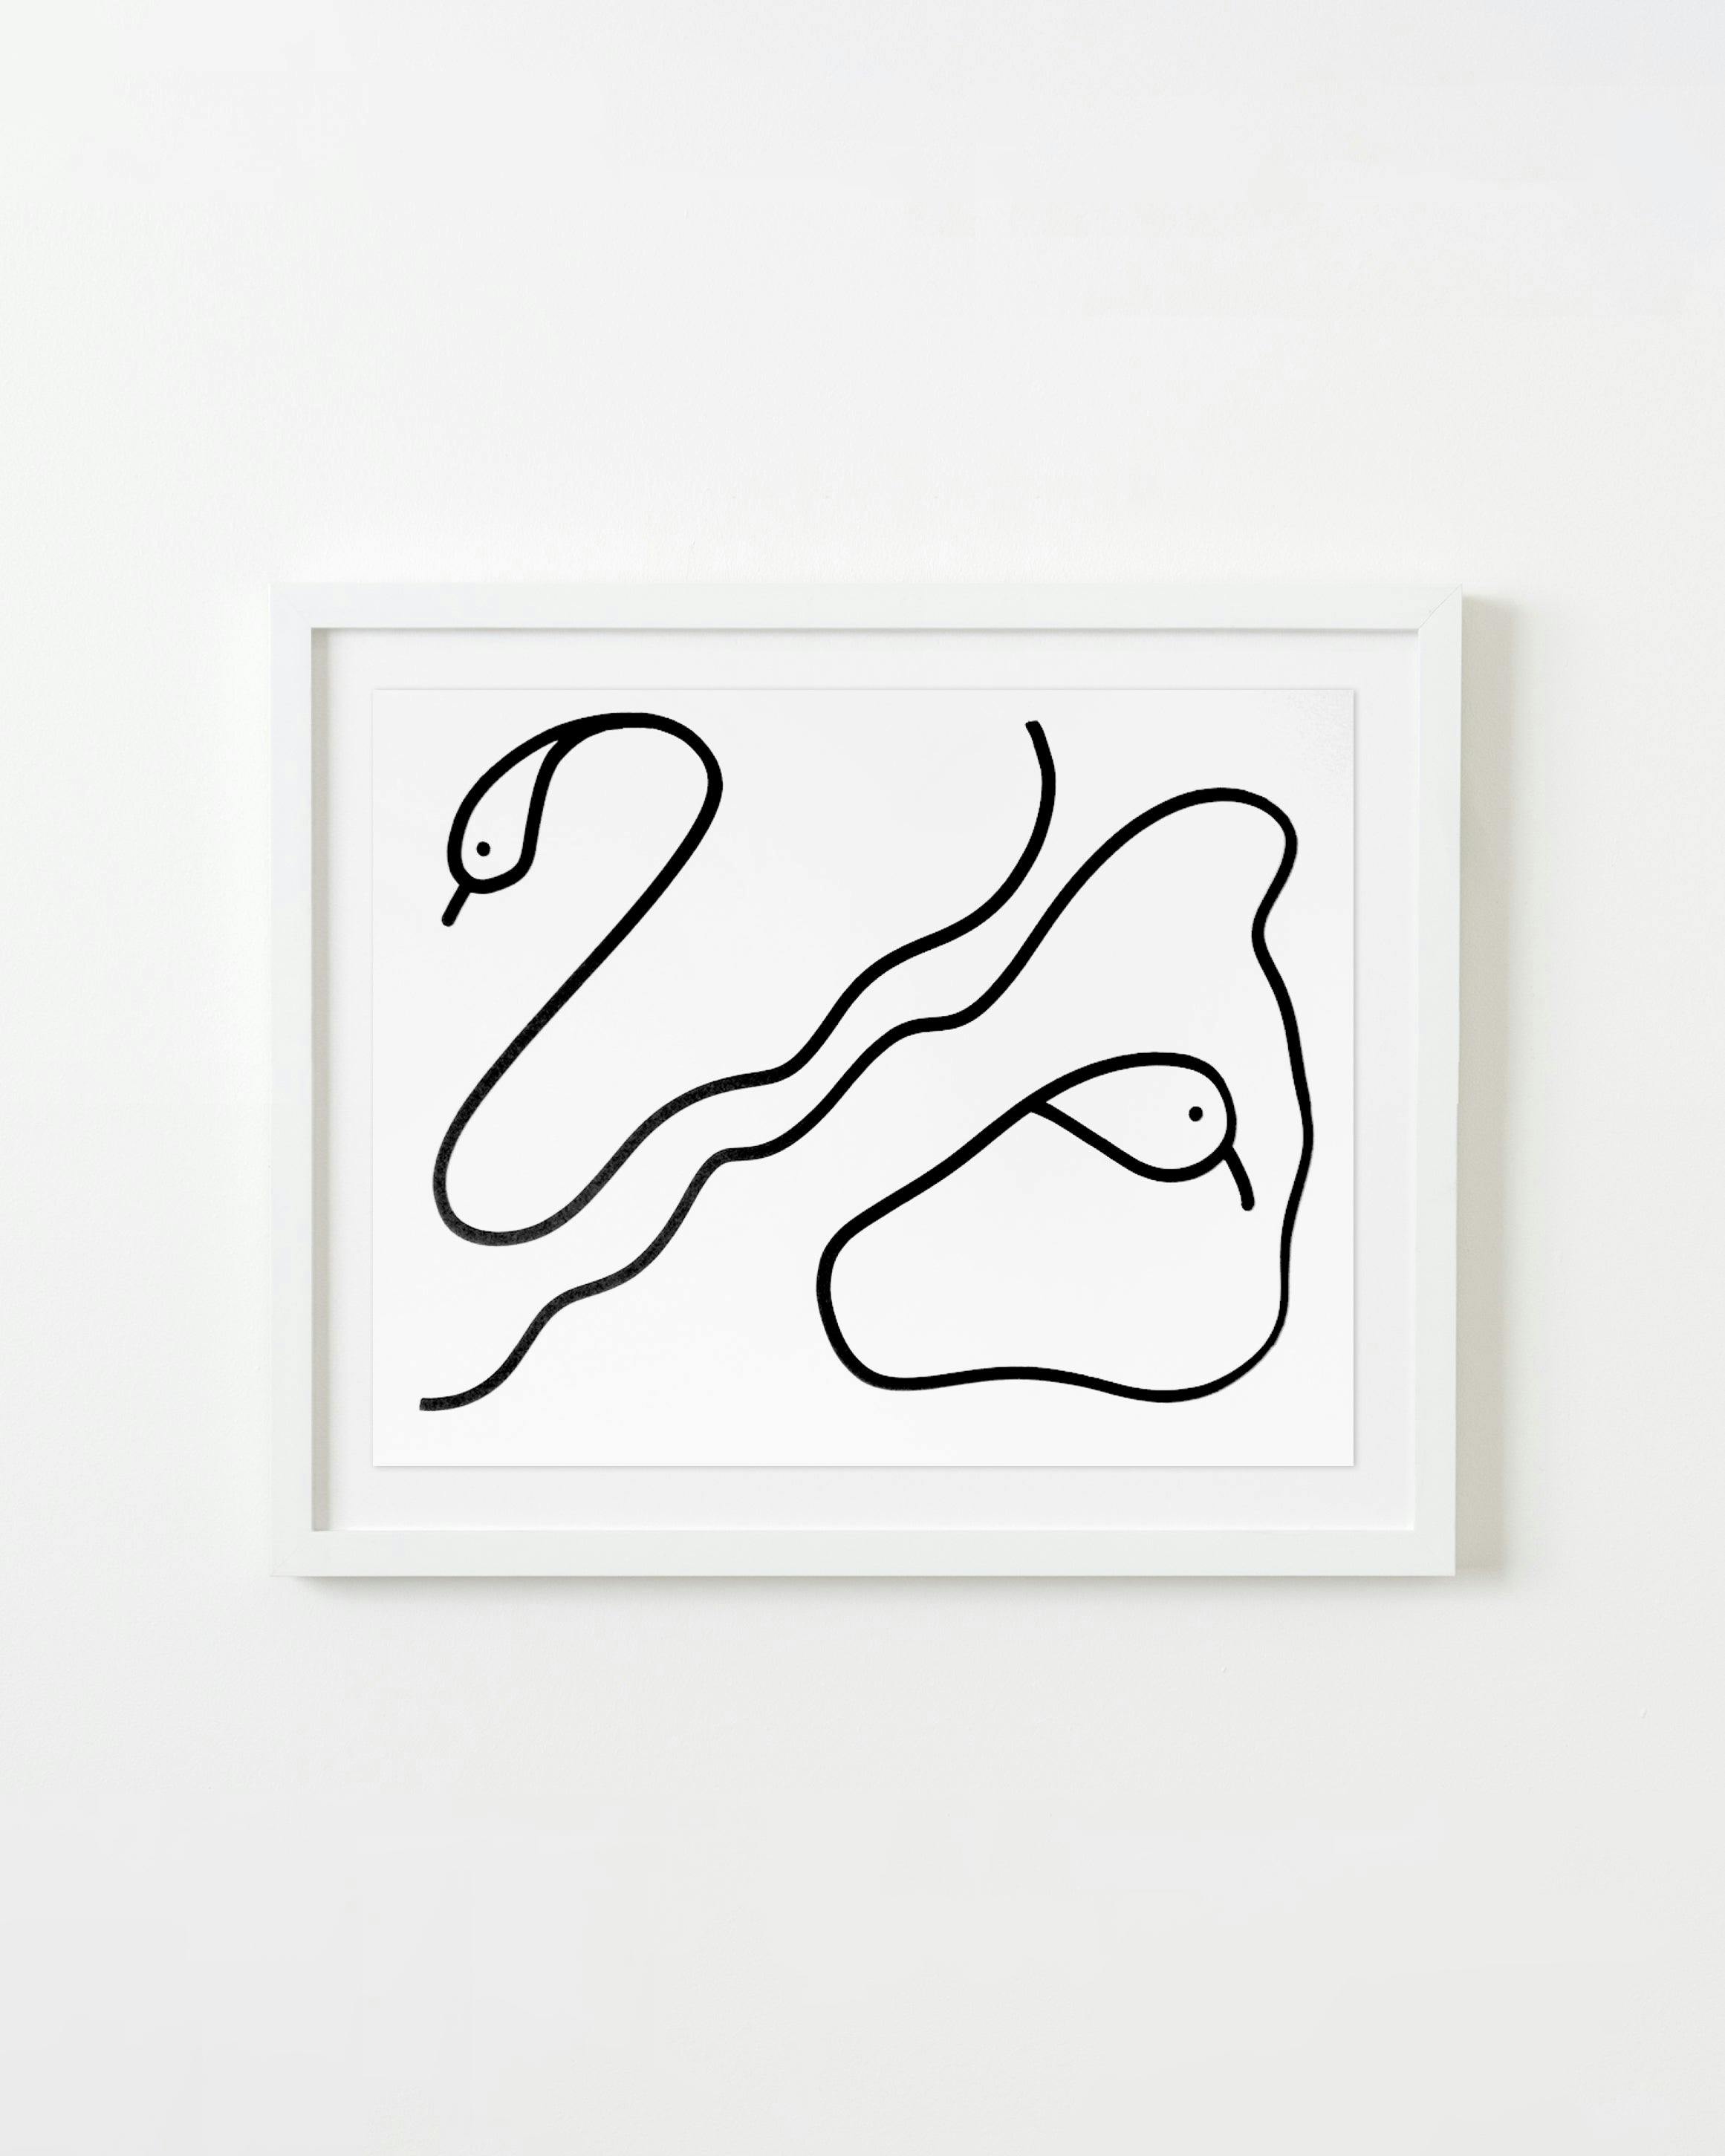 Drawing by Sayan Ray titled "Serpentine".